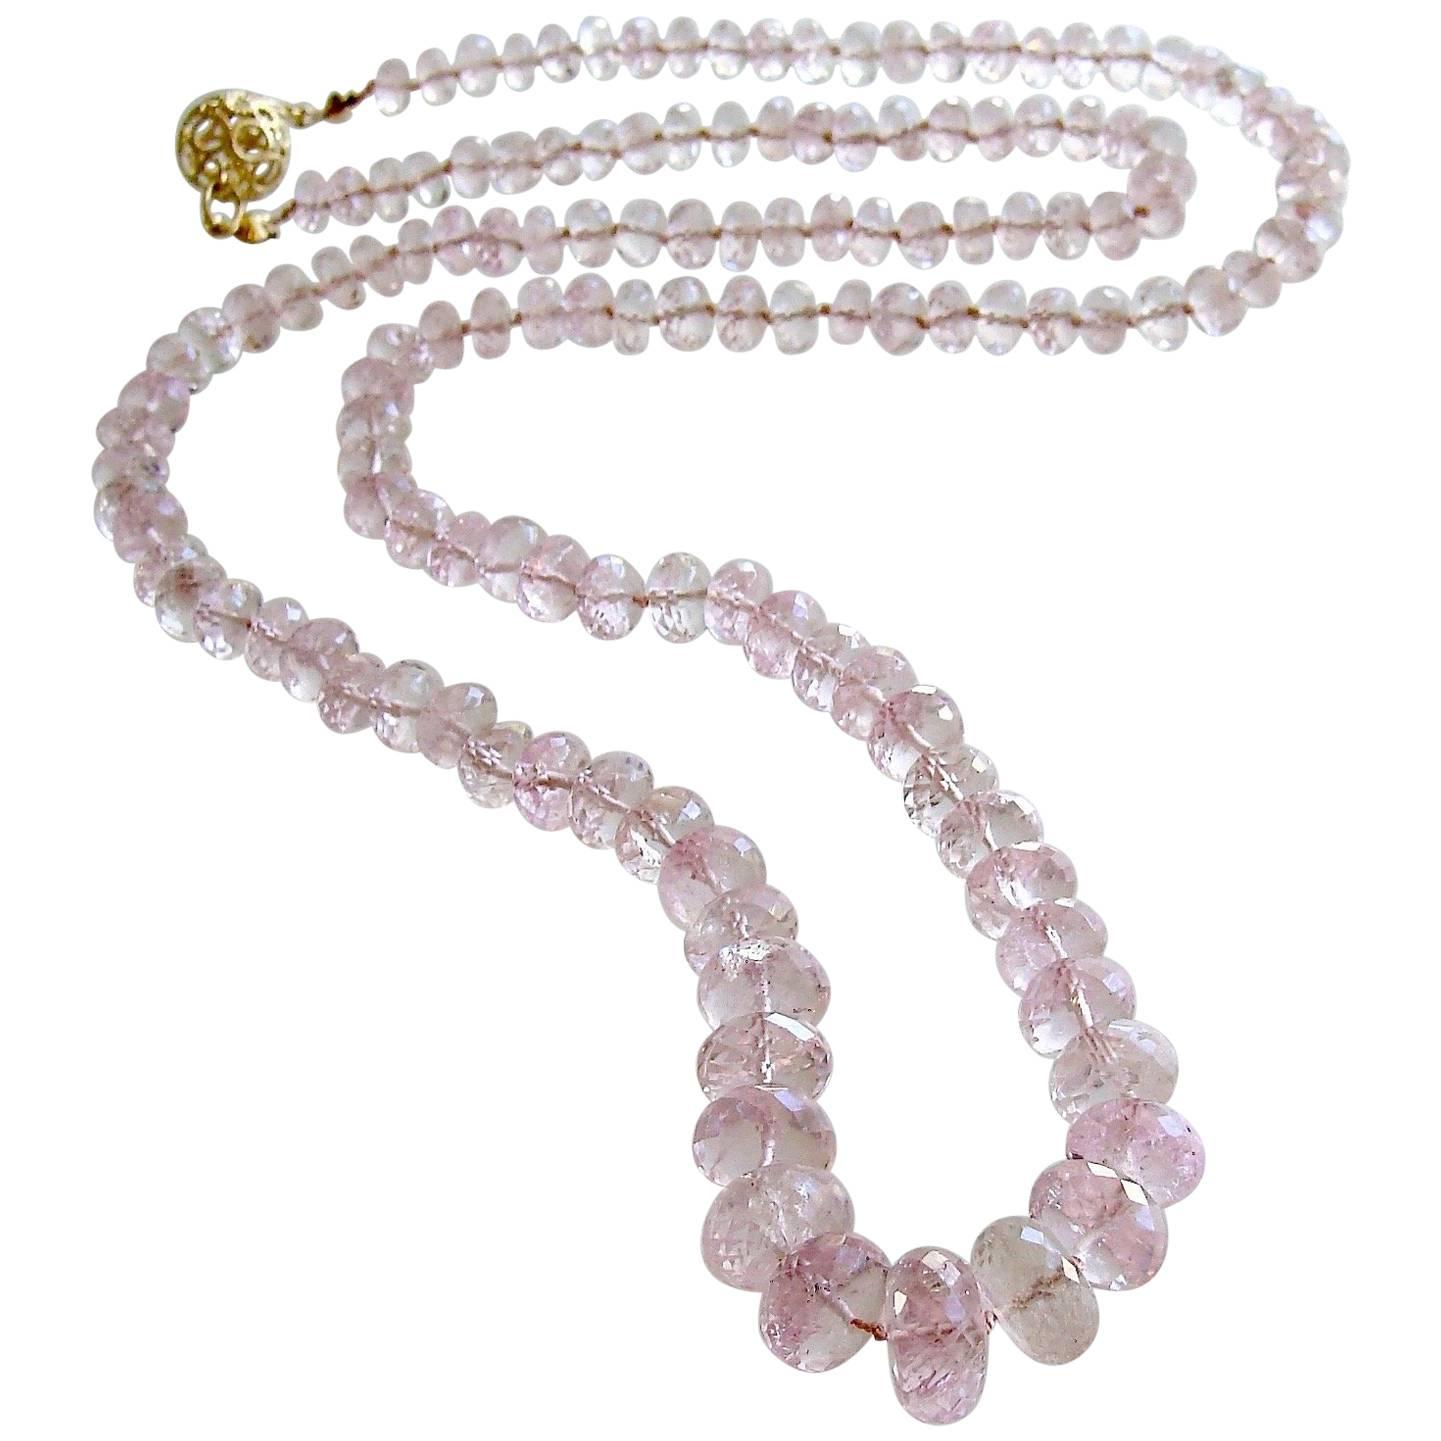 Graduated Pink Morganite Silk Knotted Opera Necklace With 14k Gold Diamond Clasp